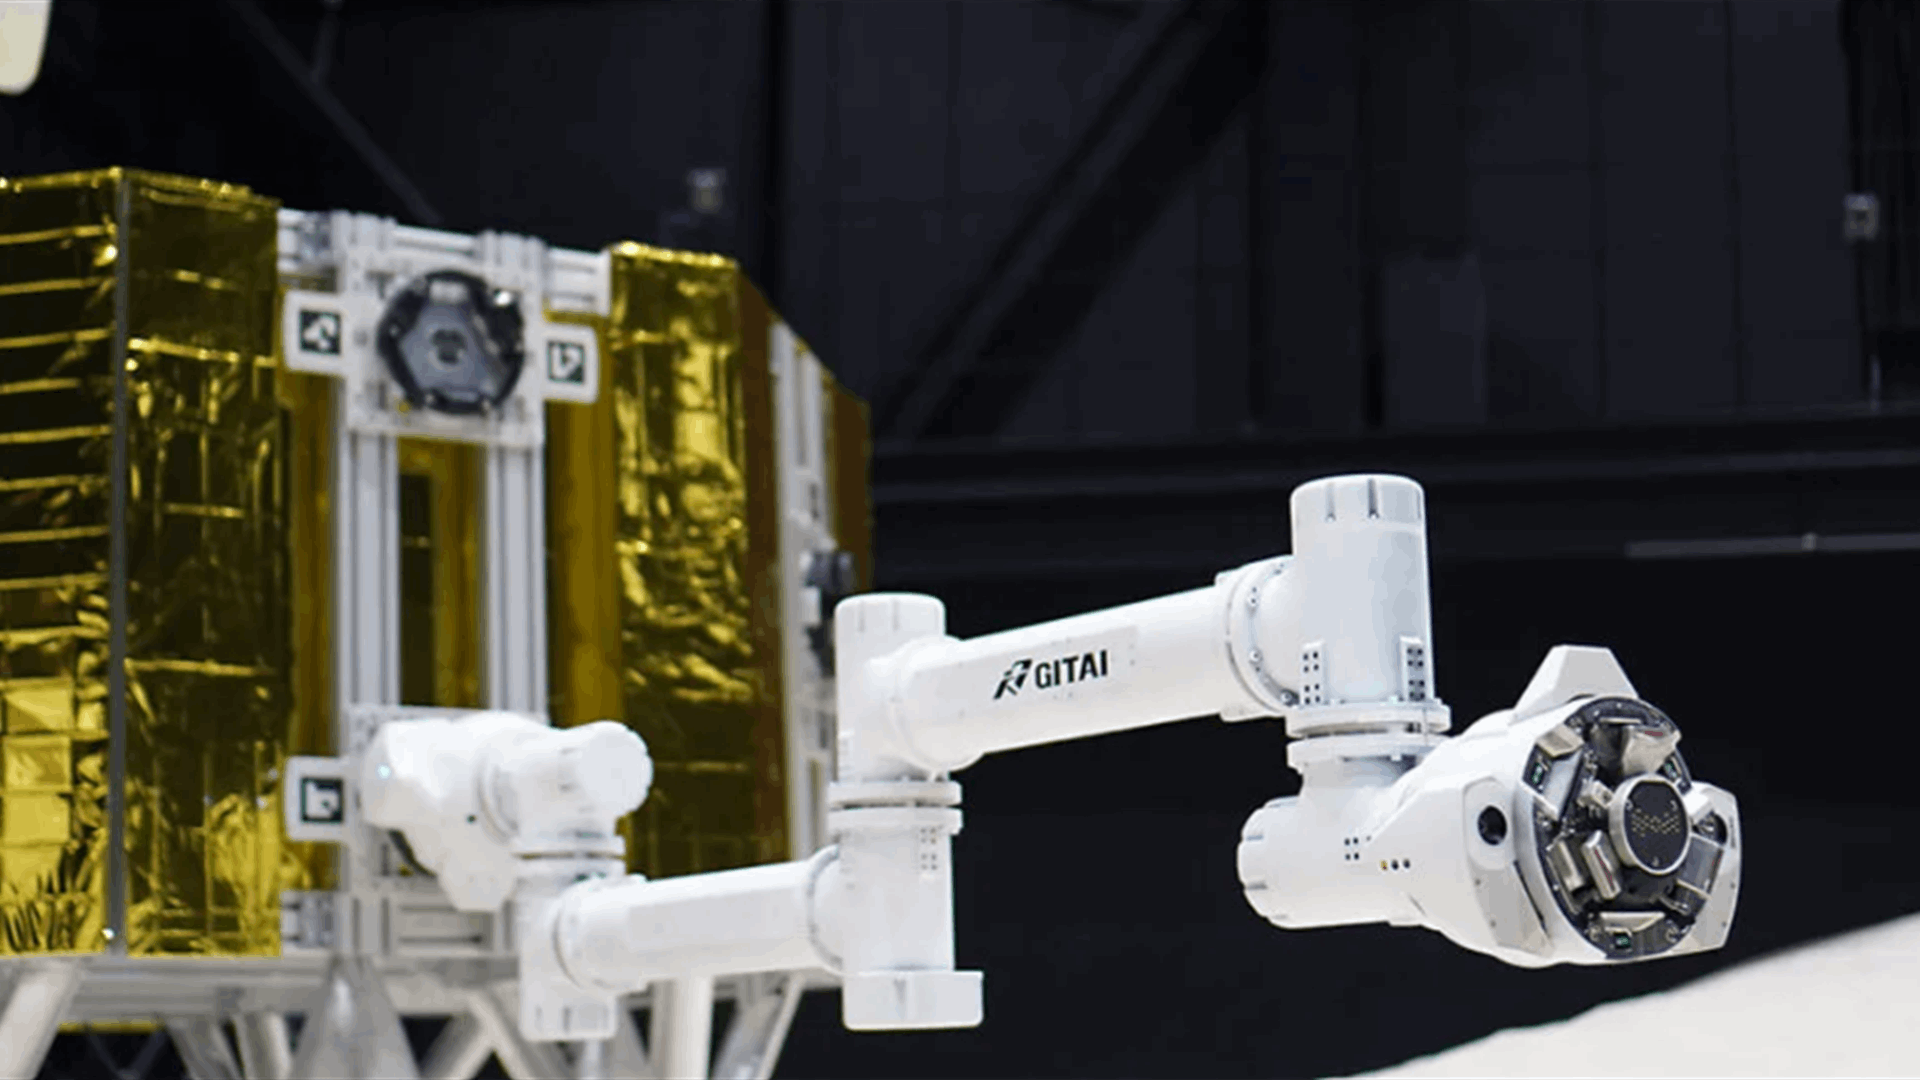 Gitai wants to build a robotic labor force for the moon and Mars